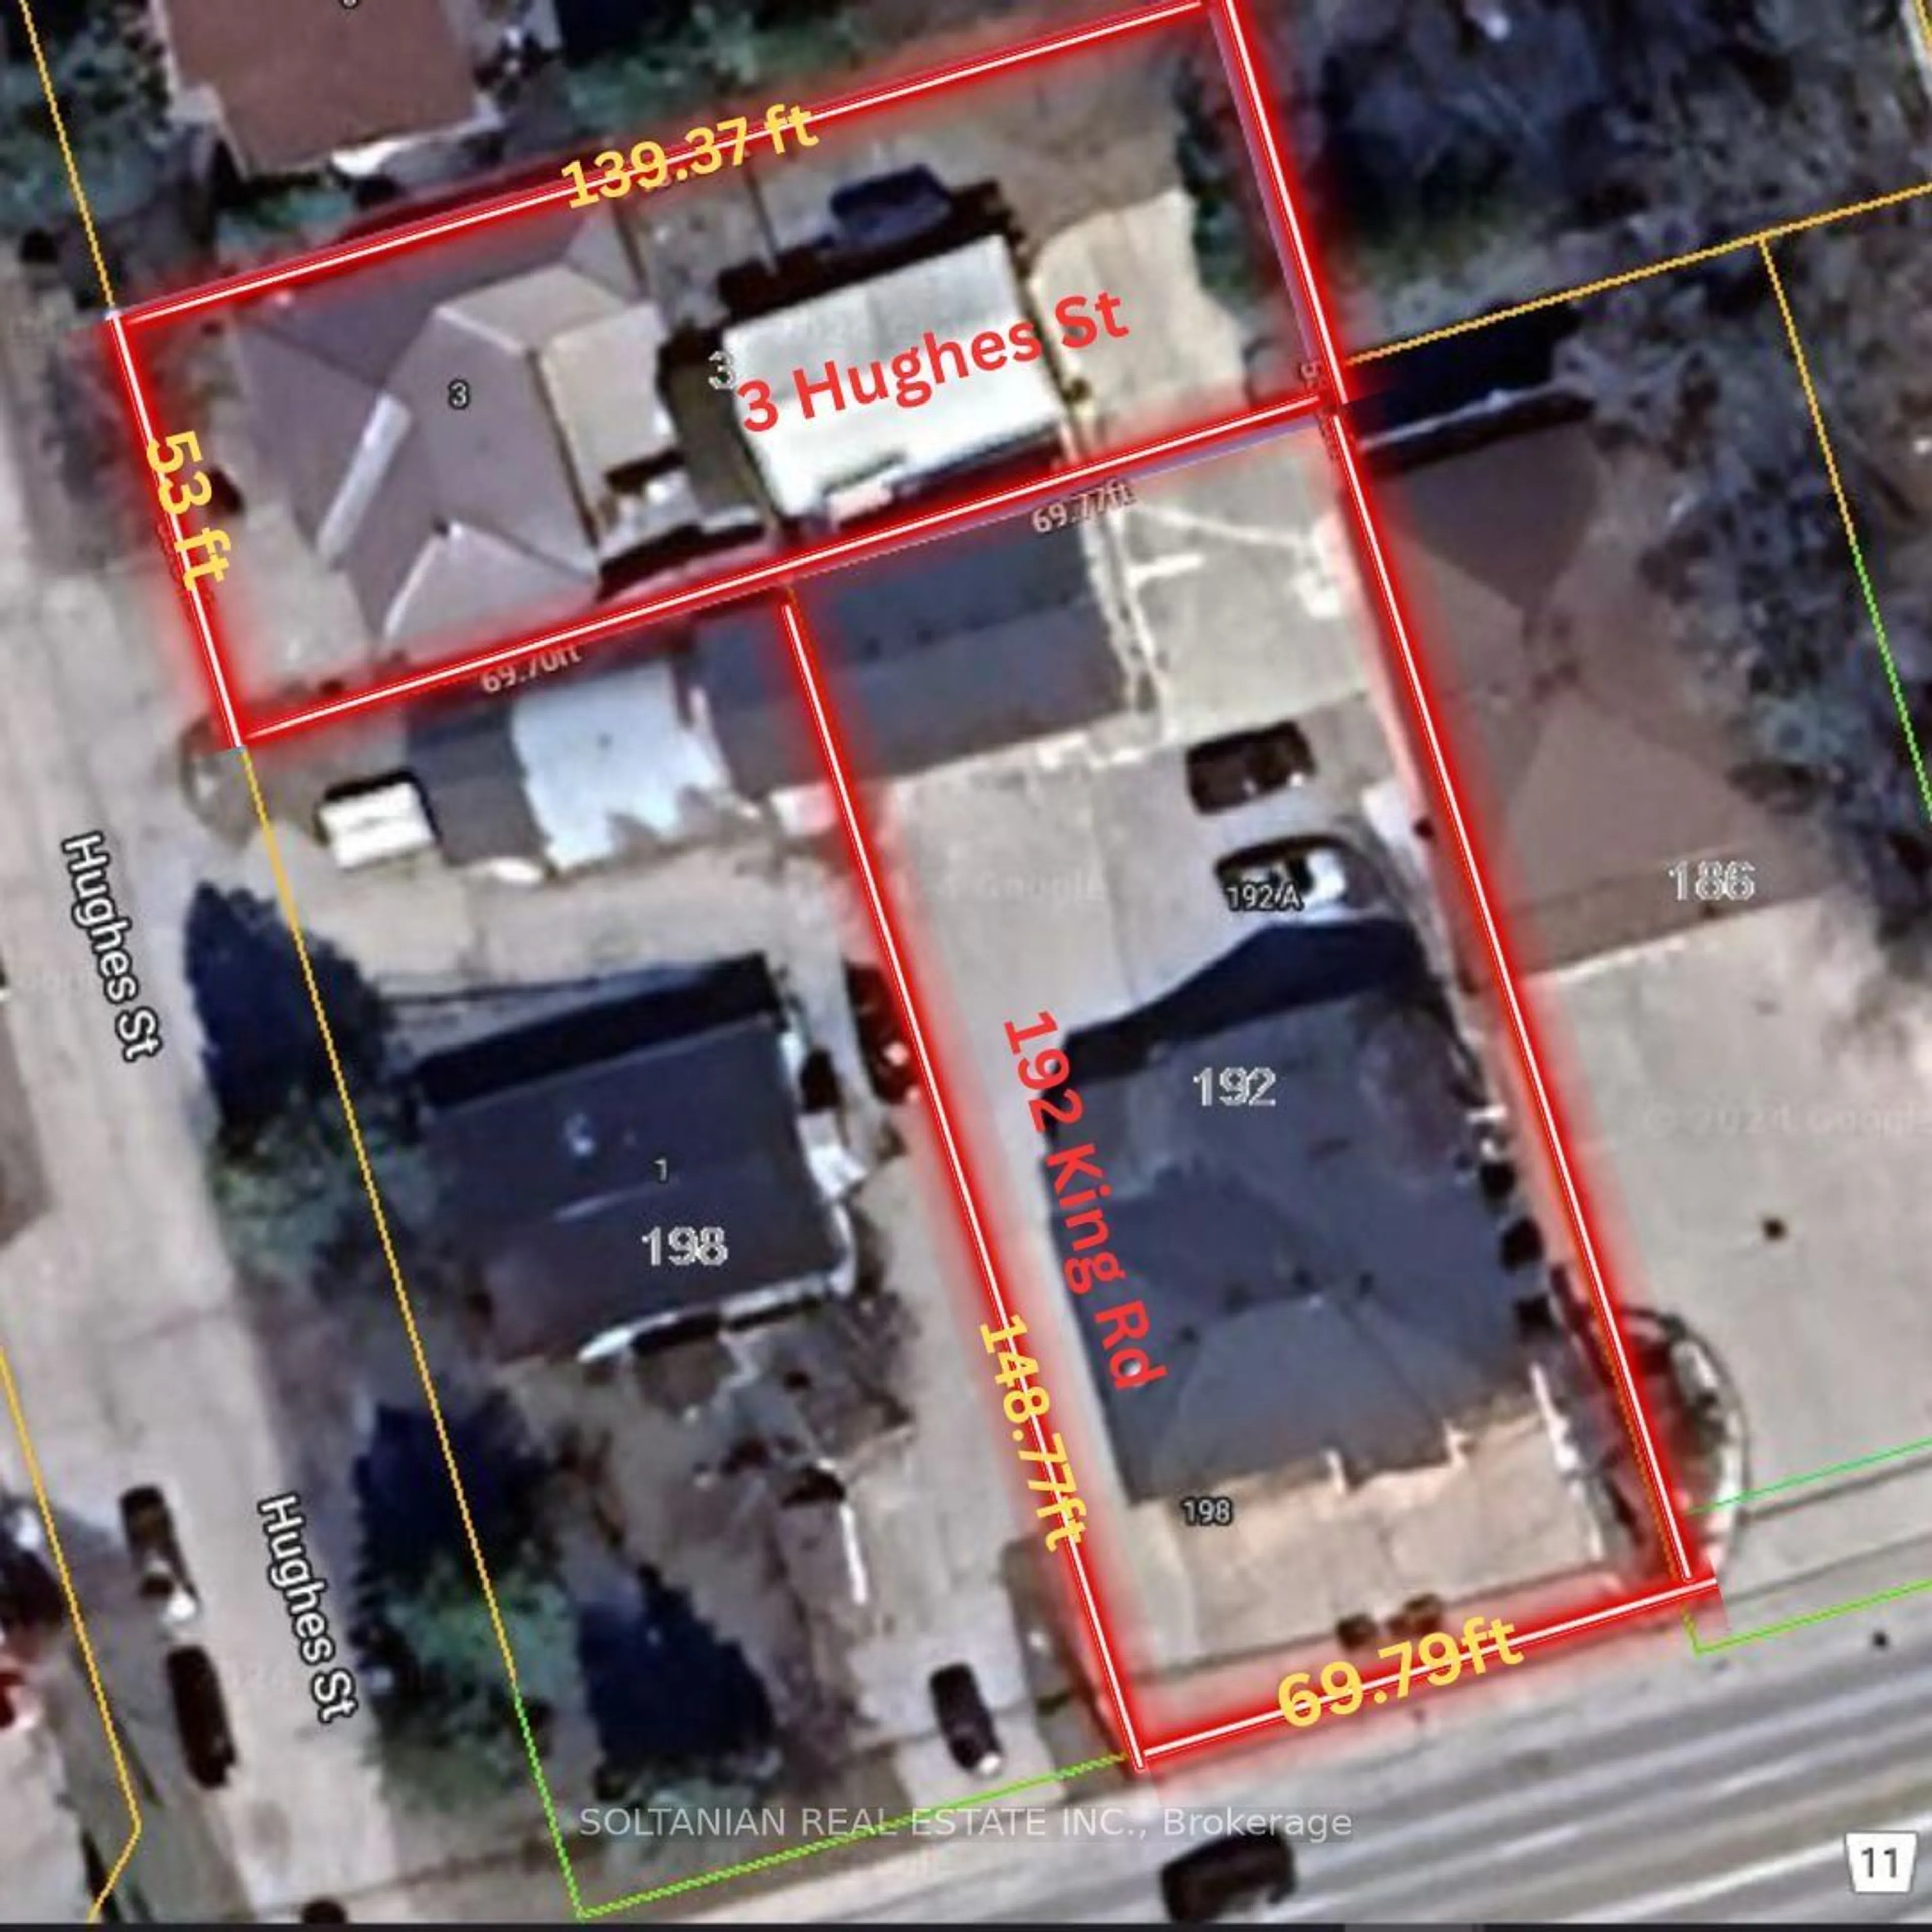 Frontside or backside of a home for 192/3 King/Hughes St Rd, Richmond Hill Ontario L4E 2W1